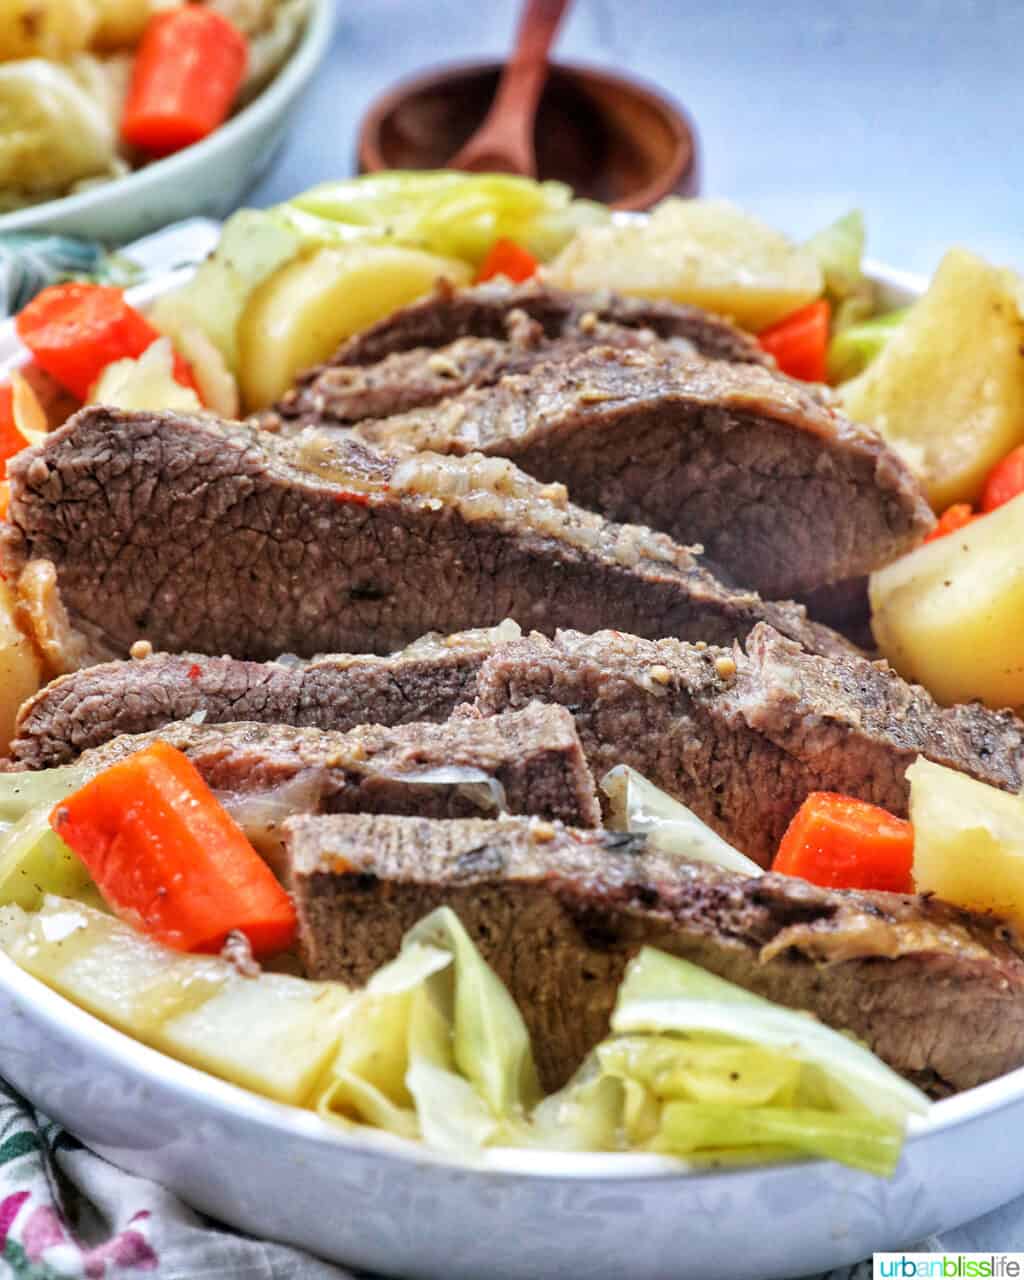 bowl of sliced dutch oven brisket with carrots, potatoes, and cabbage.